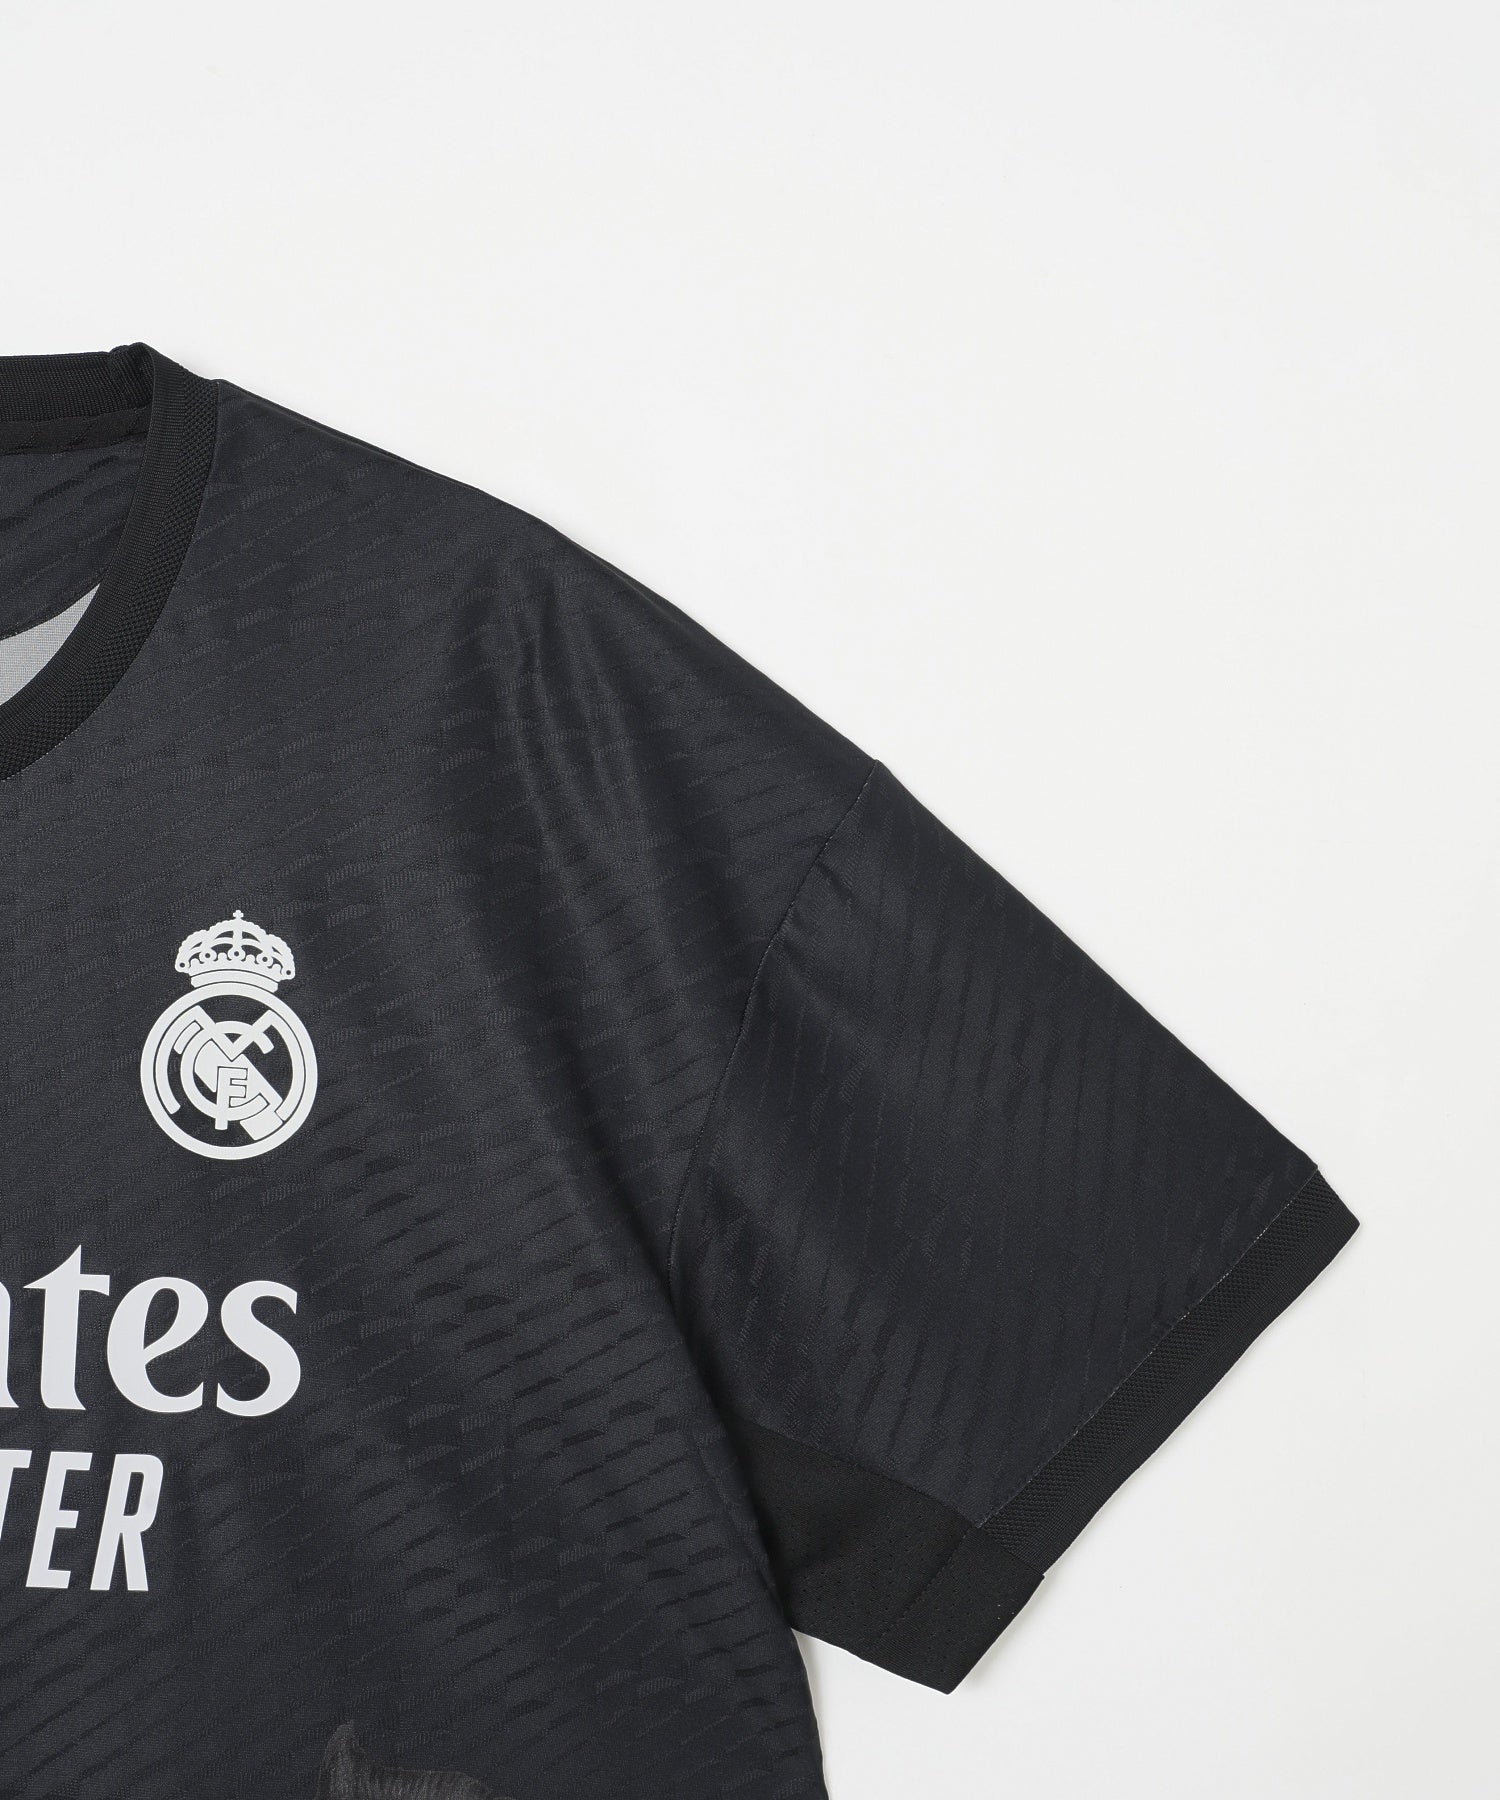 XL REAL MADRID Y-3 REAL GK JERSEY IN4275ネット上の着画をご参考ください